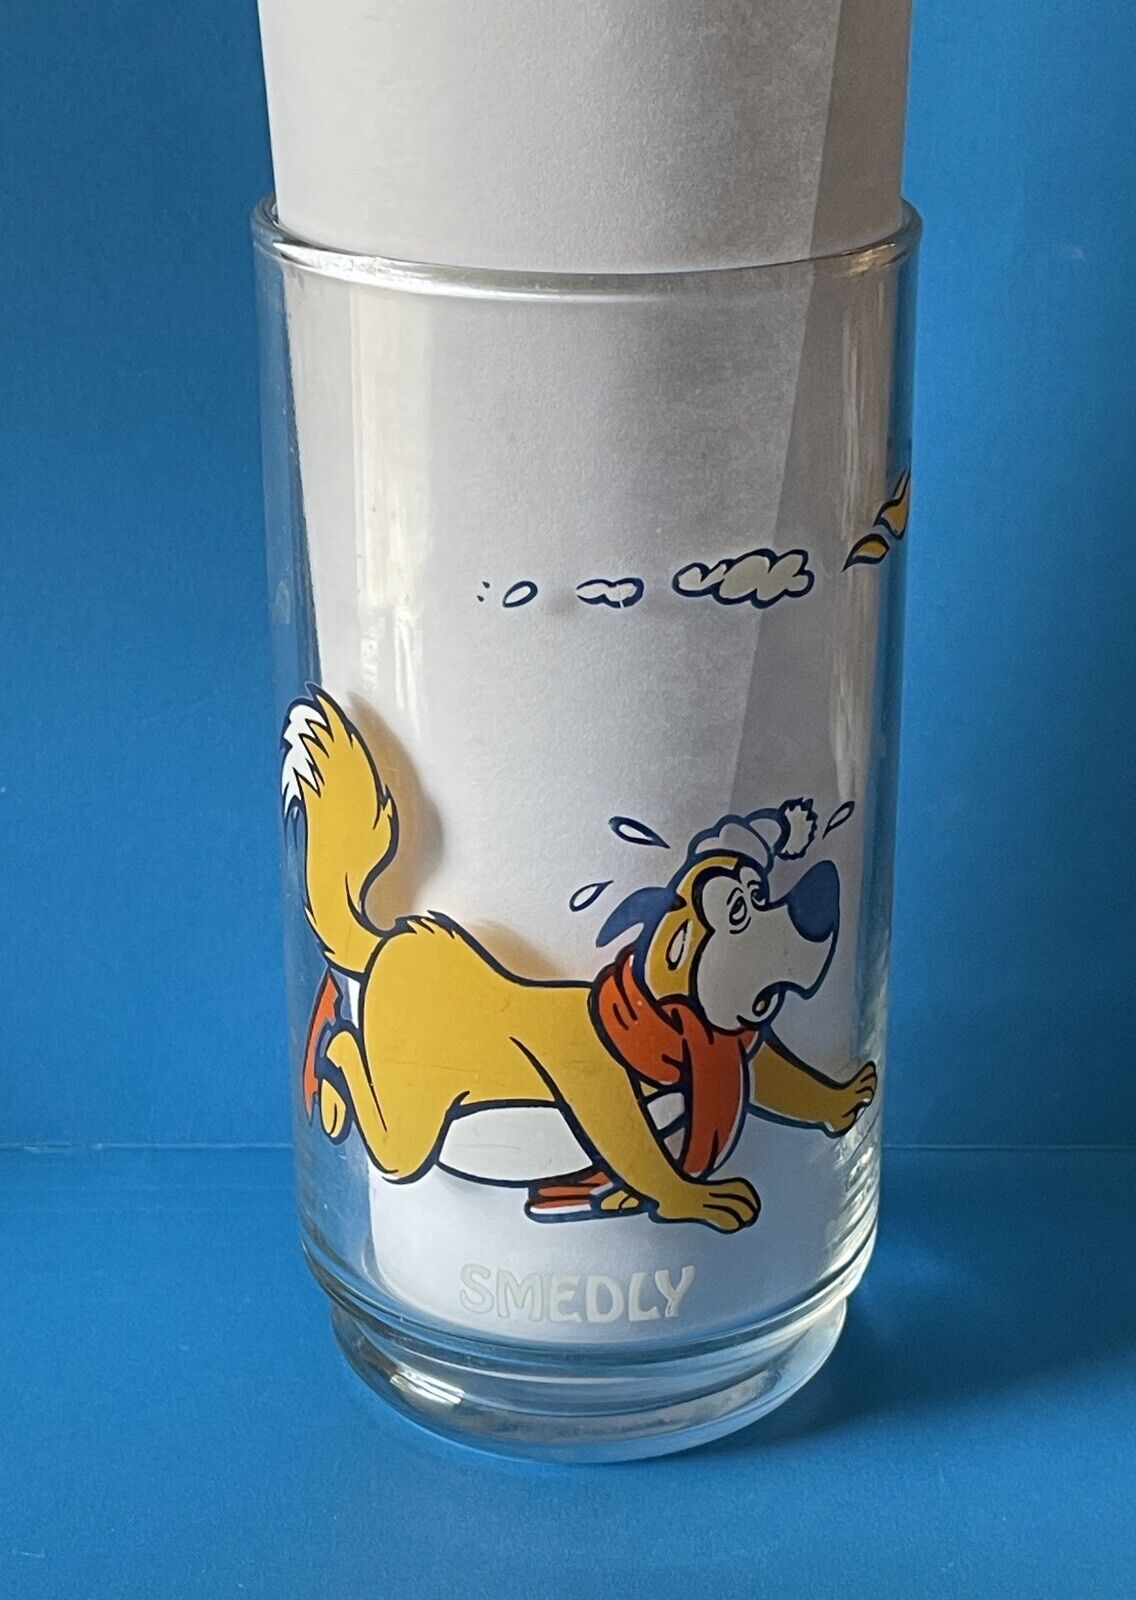 Vintage Walter Lantz Chilly Willy And Smedly Drinking Glass